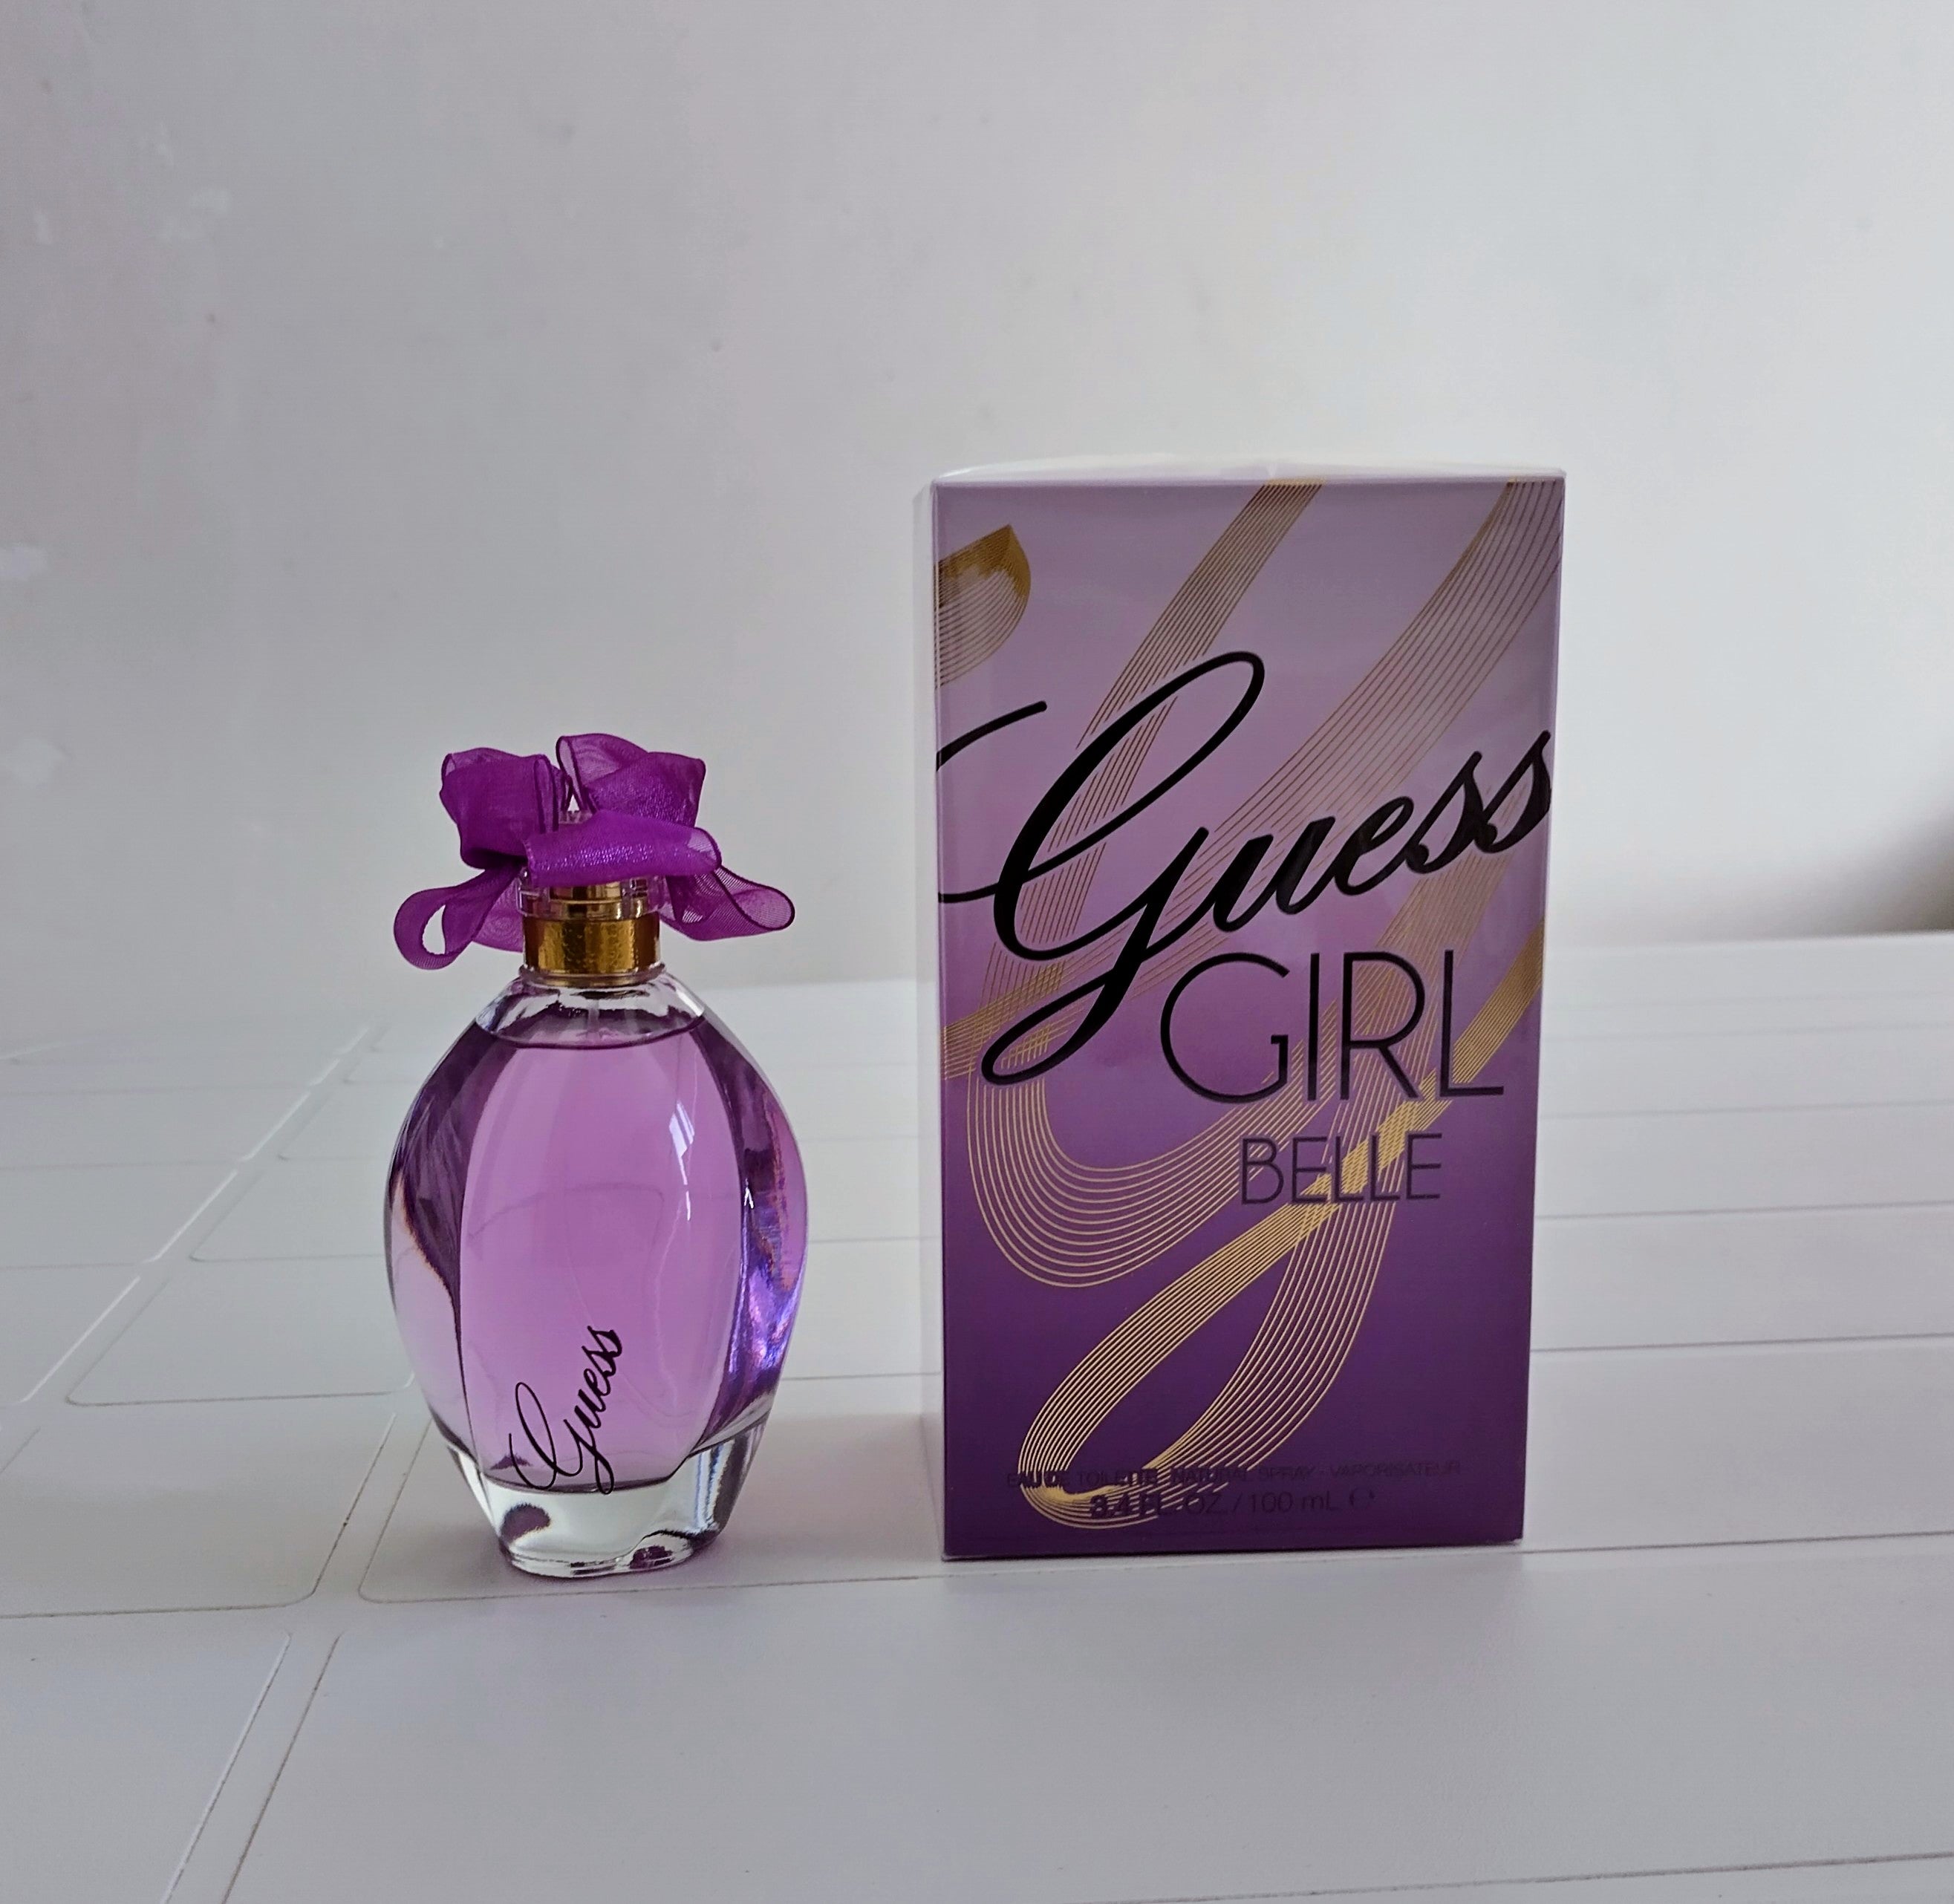 GUESS GIRL BELLE – Odosastyle